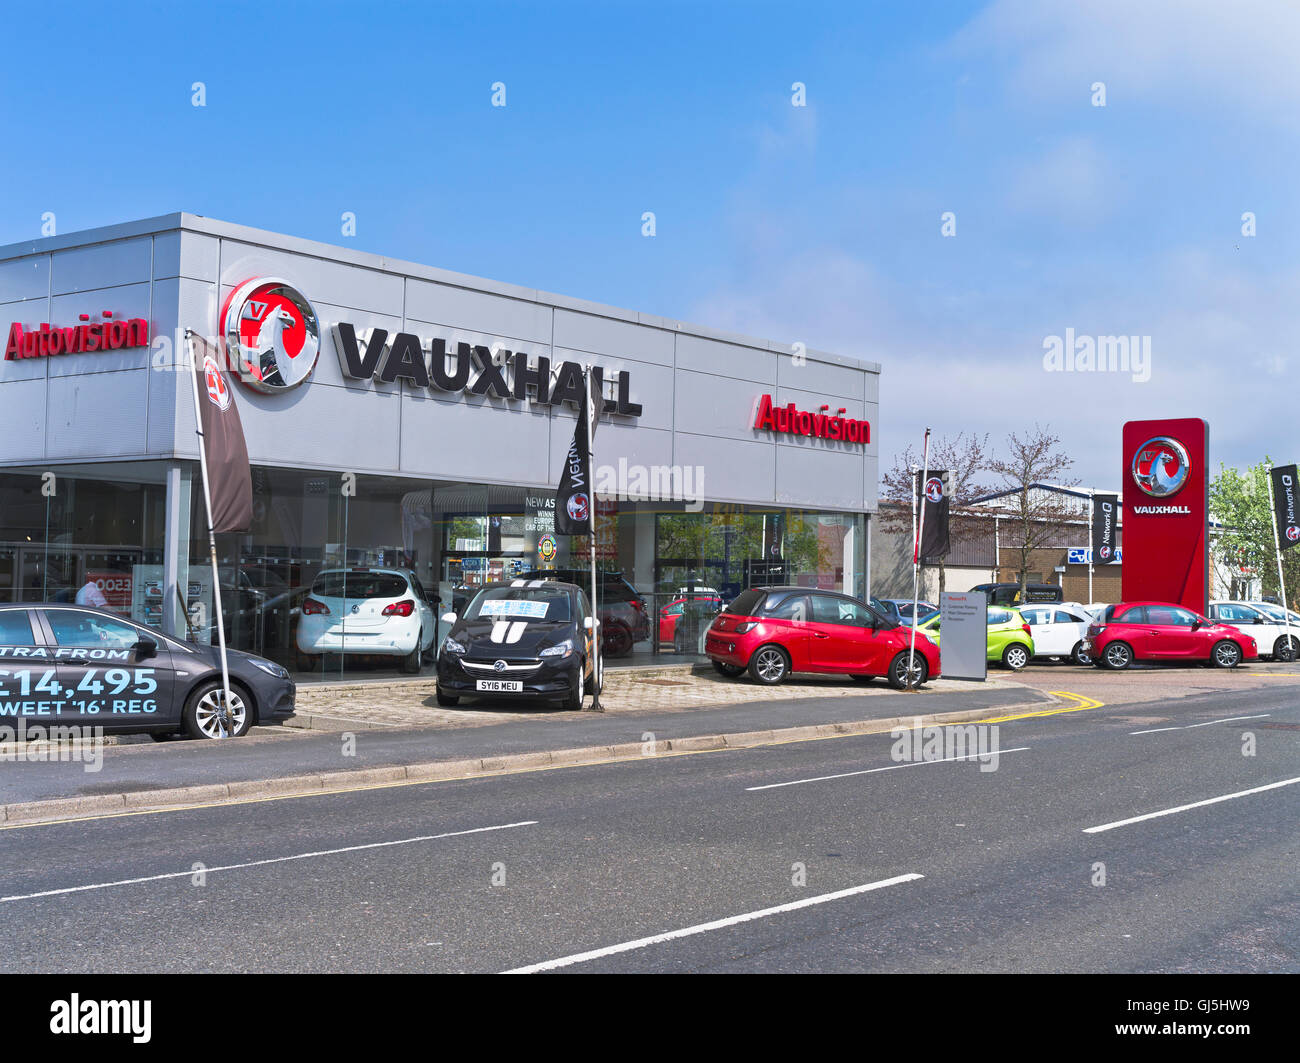 dh Dealer VAUXHALL UK Car showroom exterior cars in Vauxhall Motors forecourt for sale dealership Stock Photo